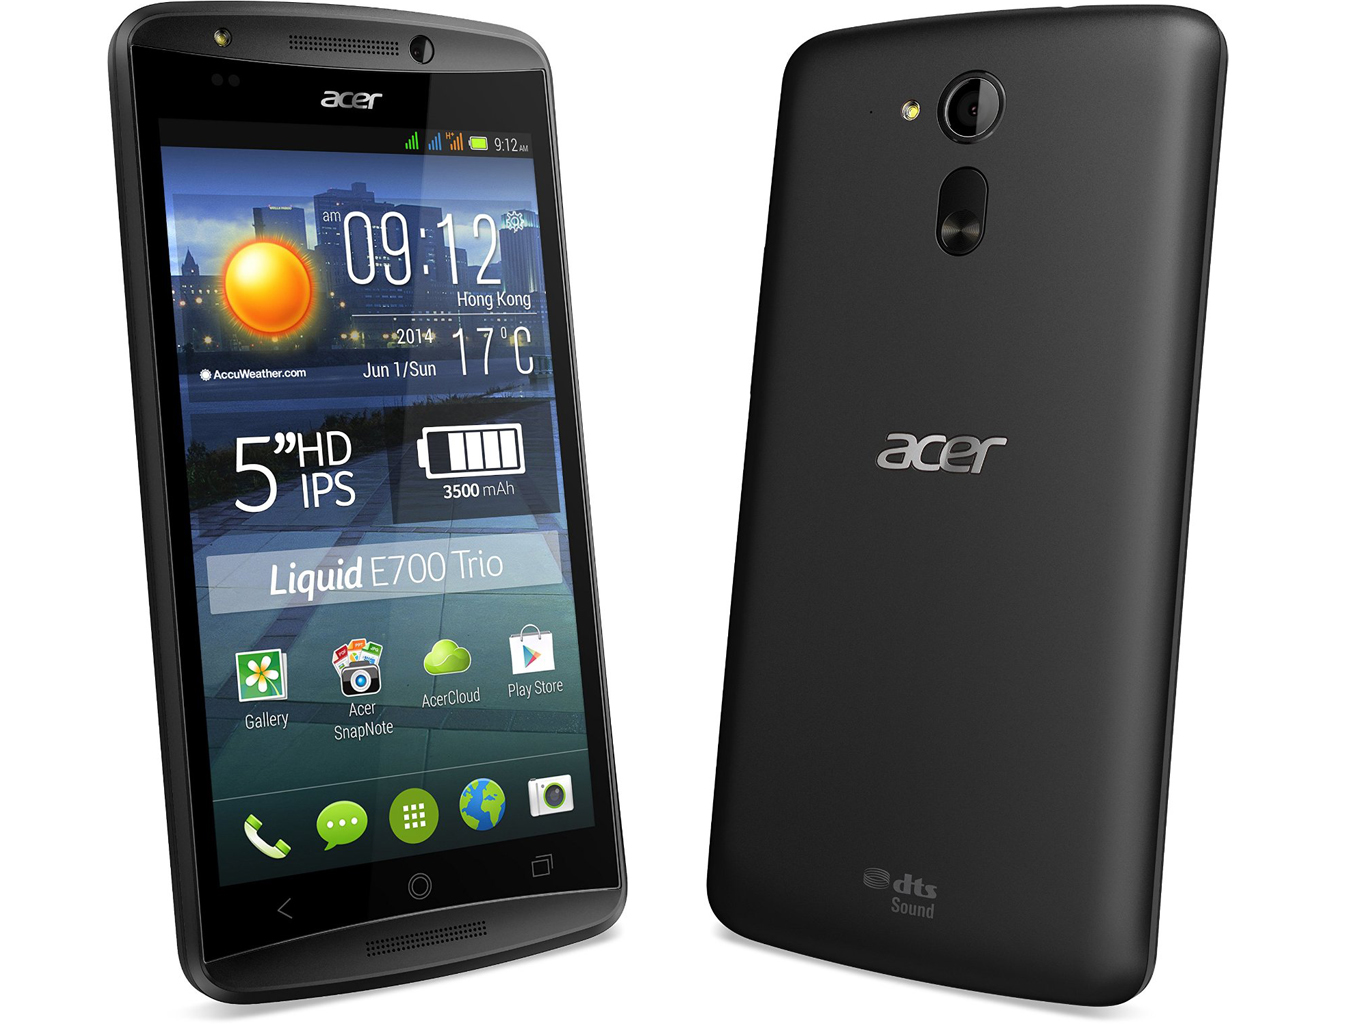 Uninstall Magisk and Unroot your Acer Liquid E700